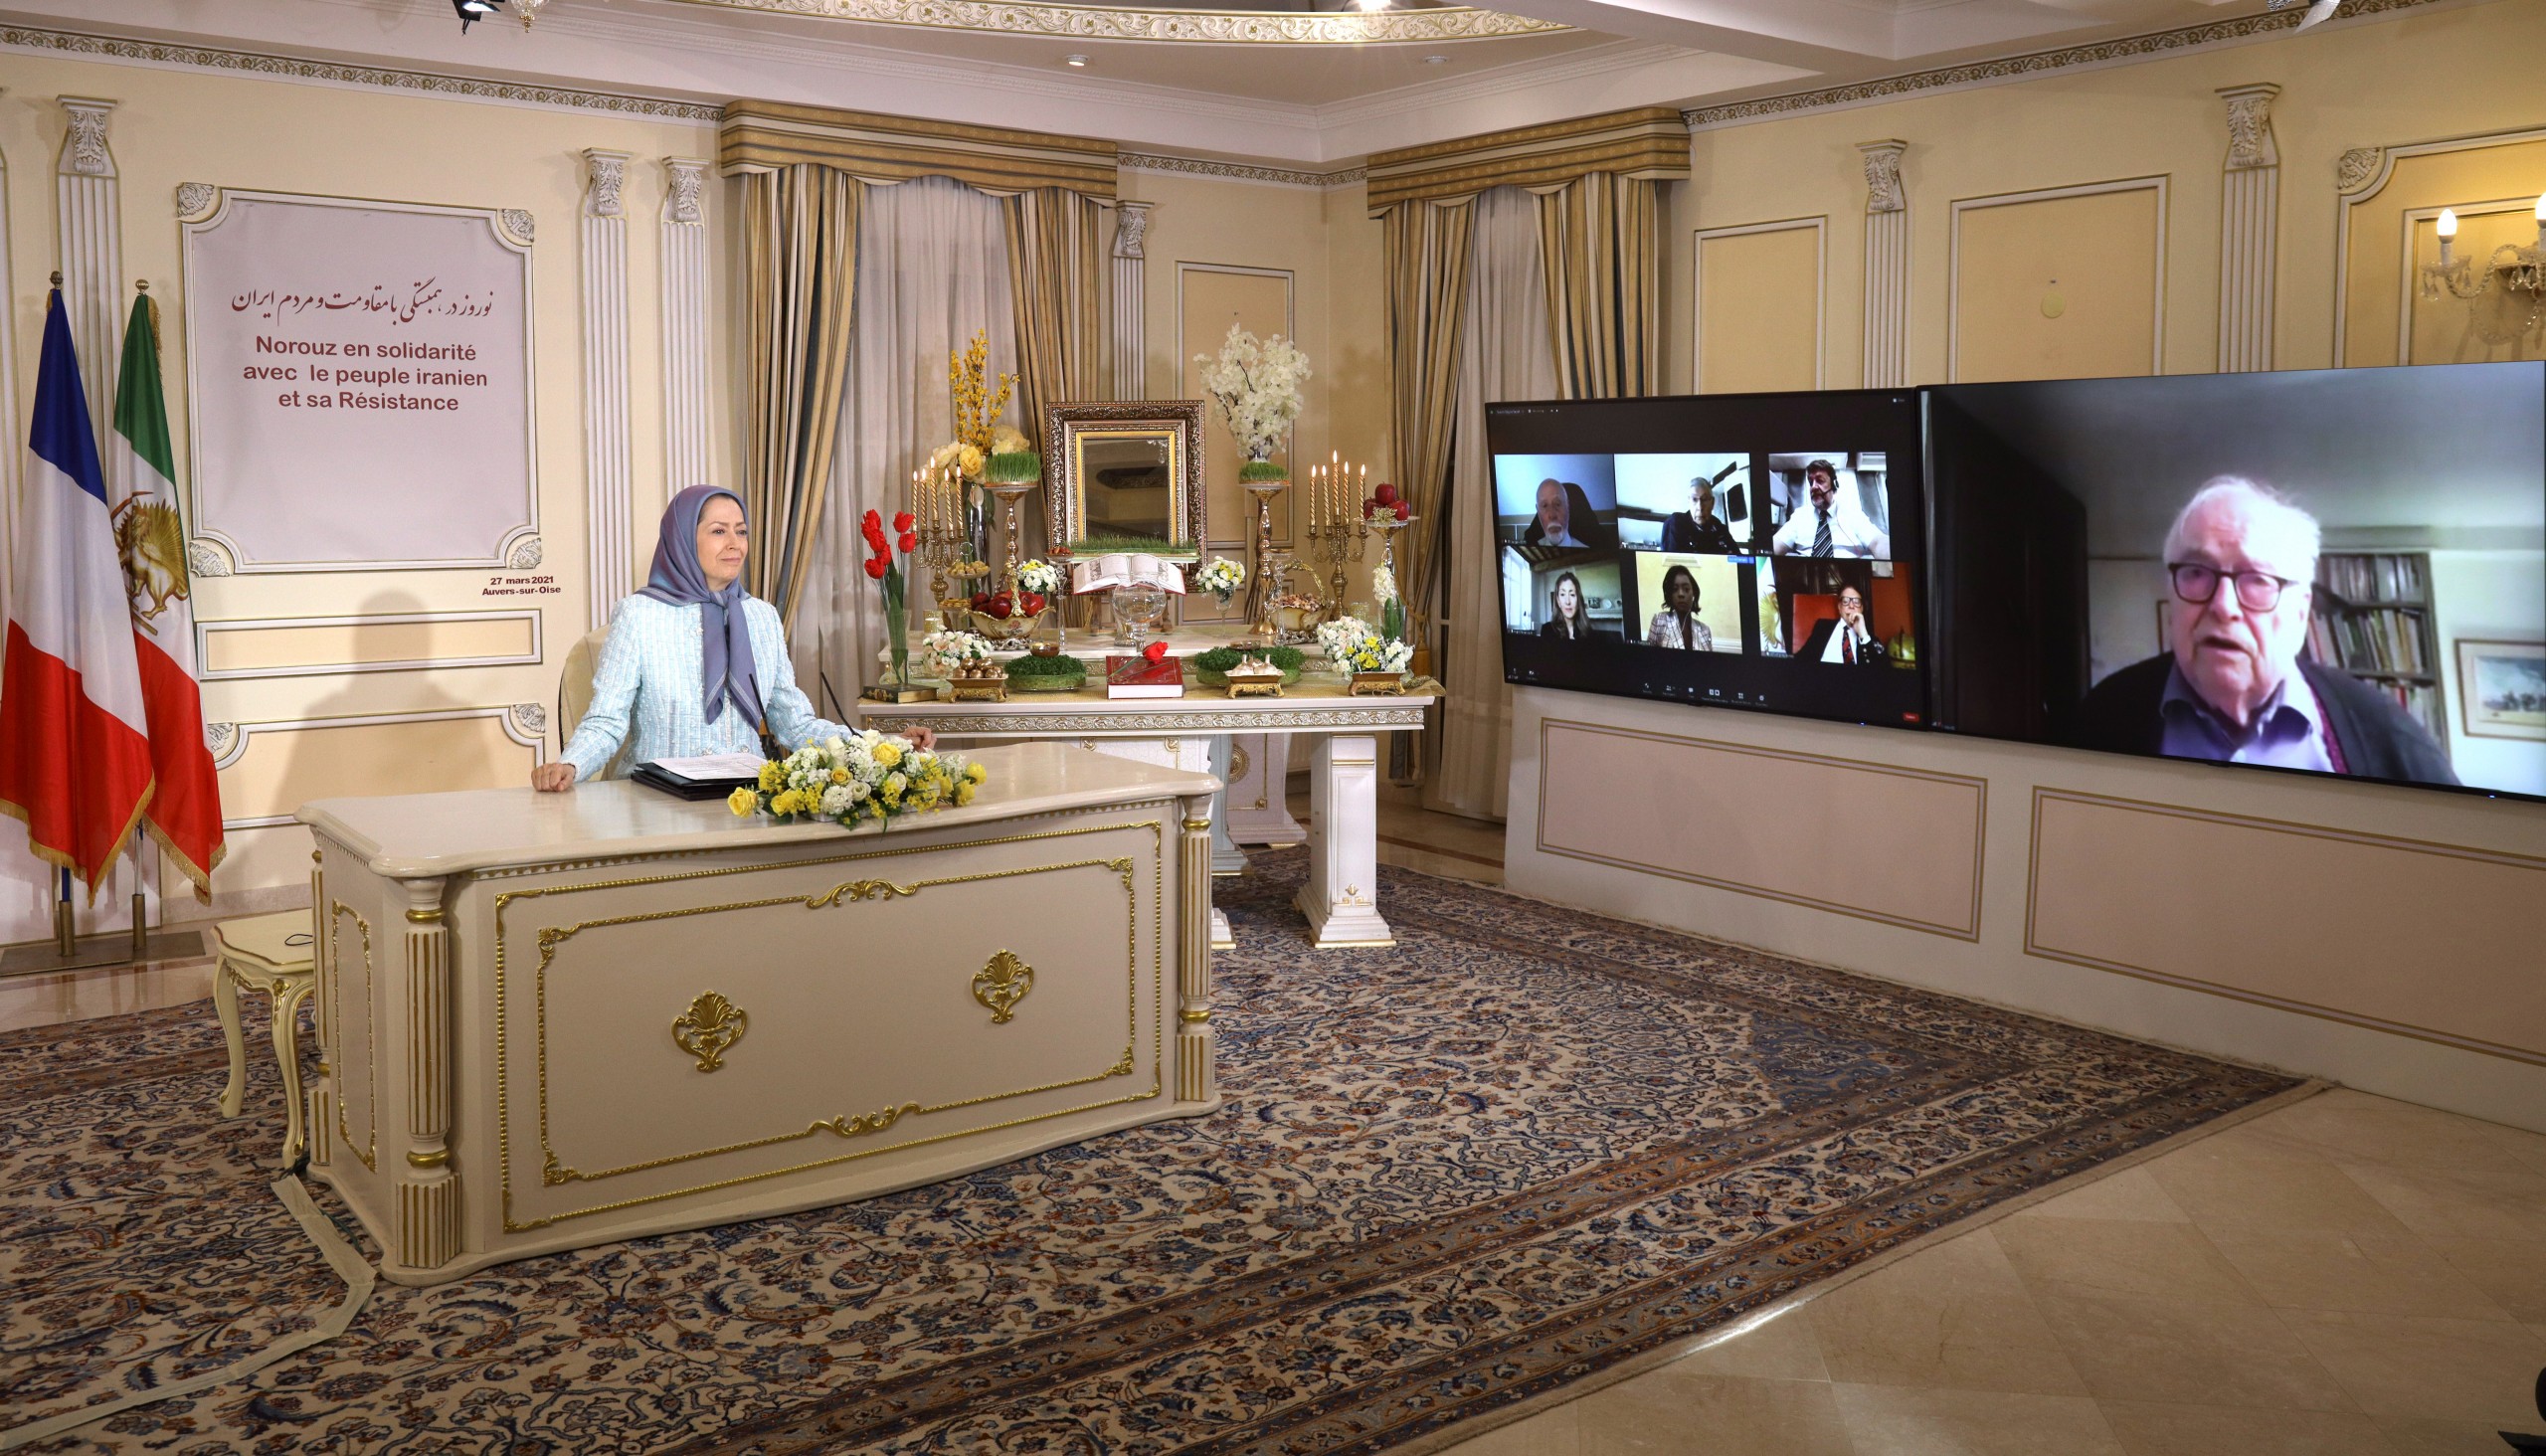 Maryam Rajavi: The people of Iran expect Europe to adopt a firm policy vis-à-vis the Iranian regime and in defense of human rights